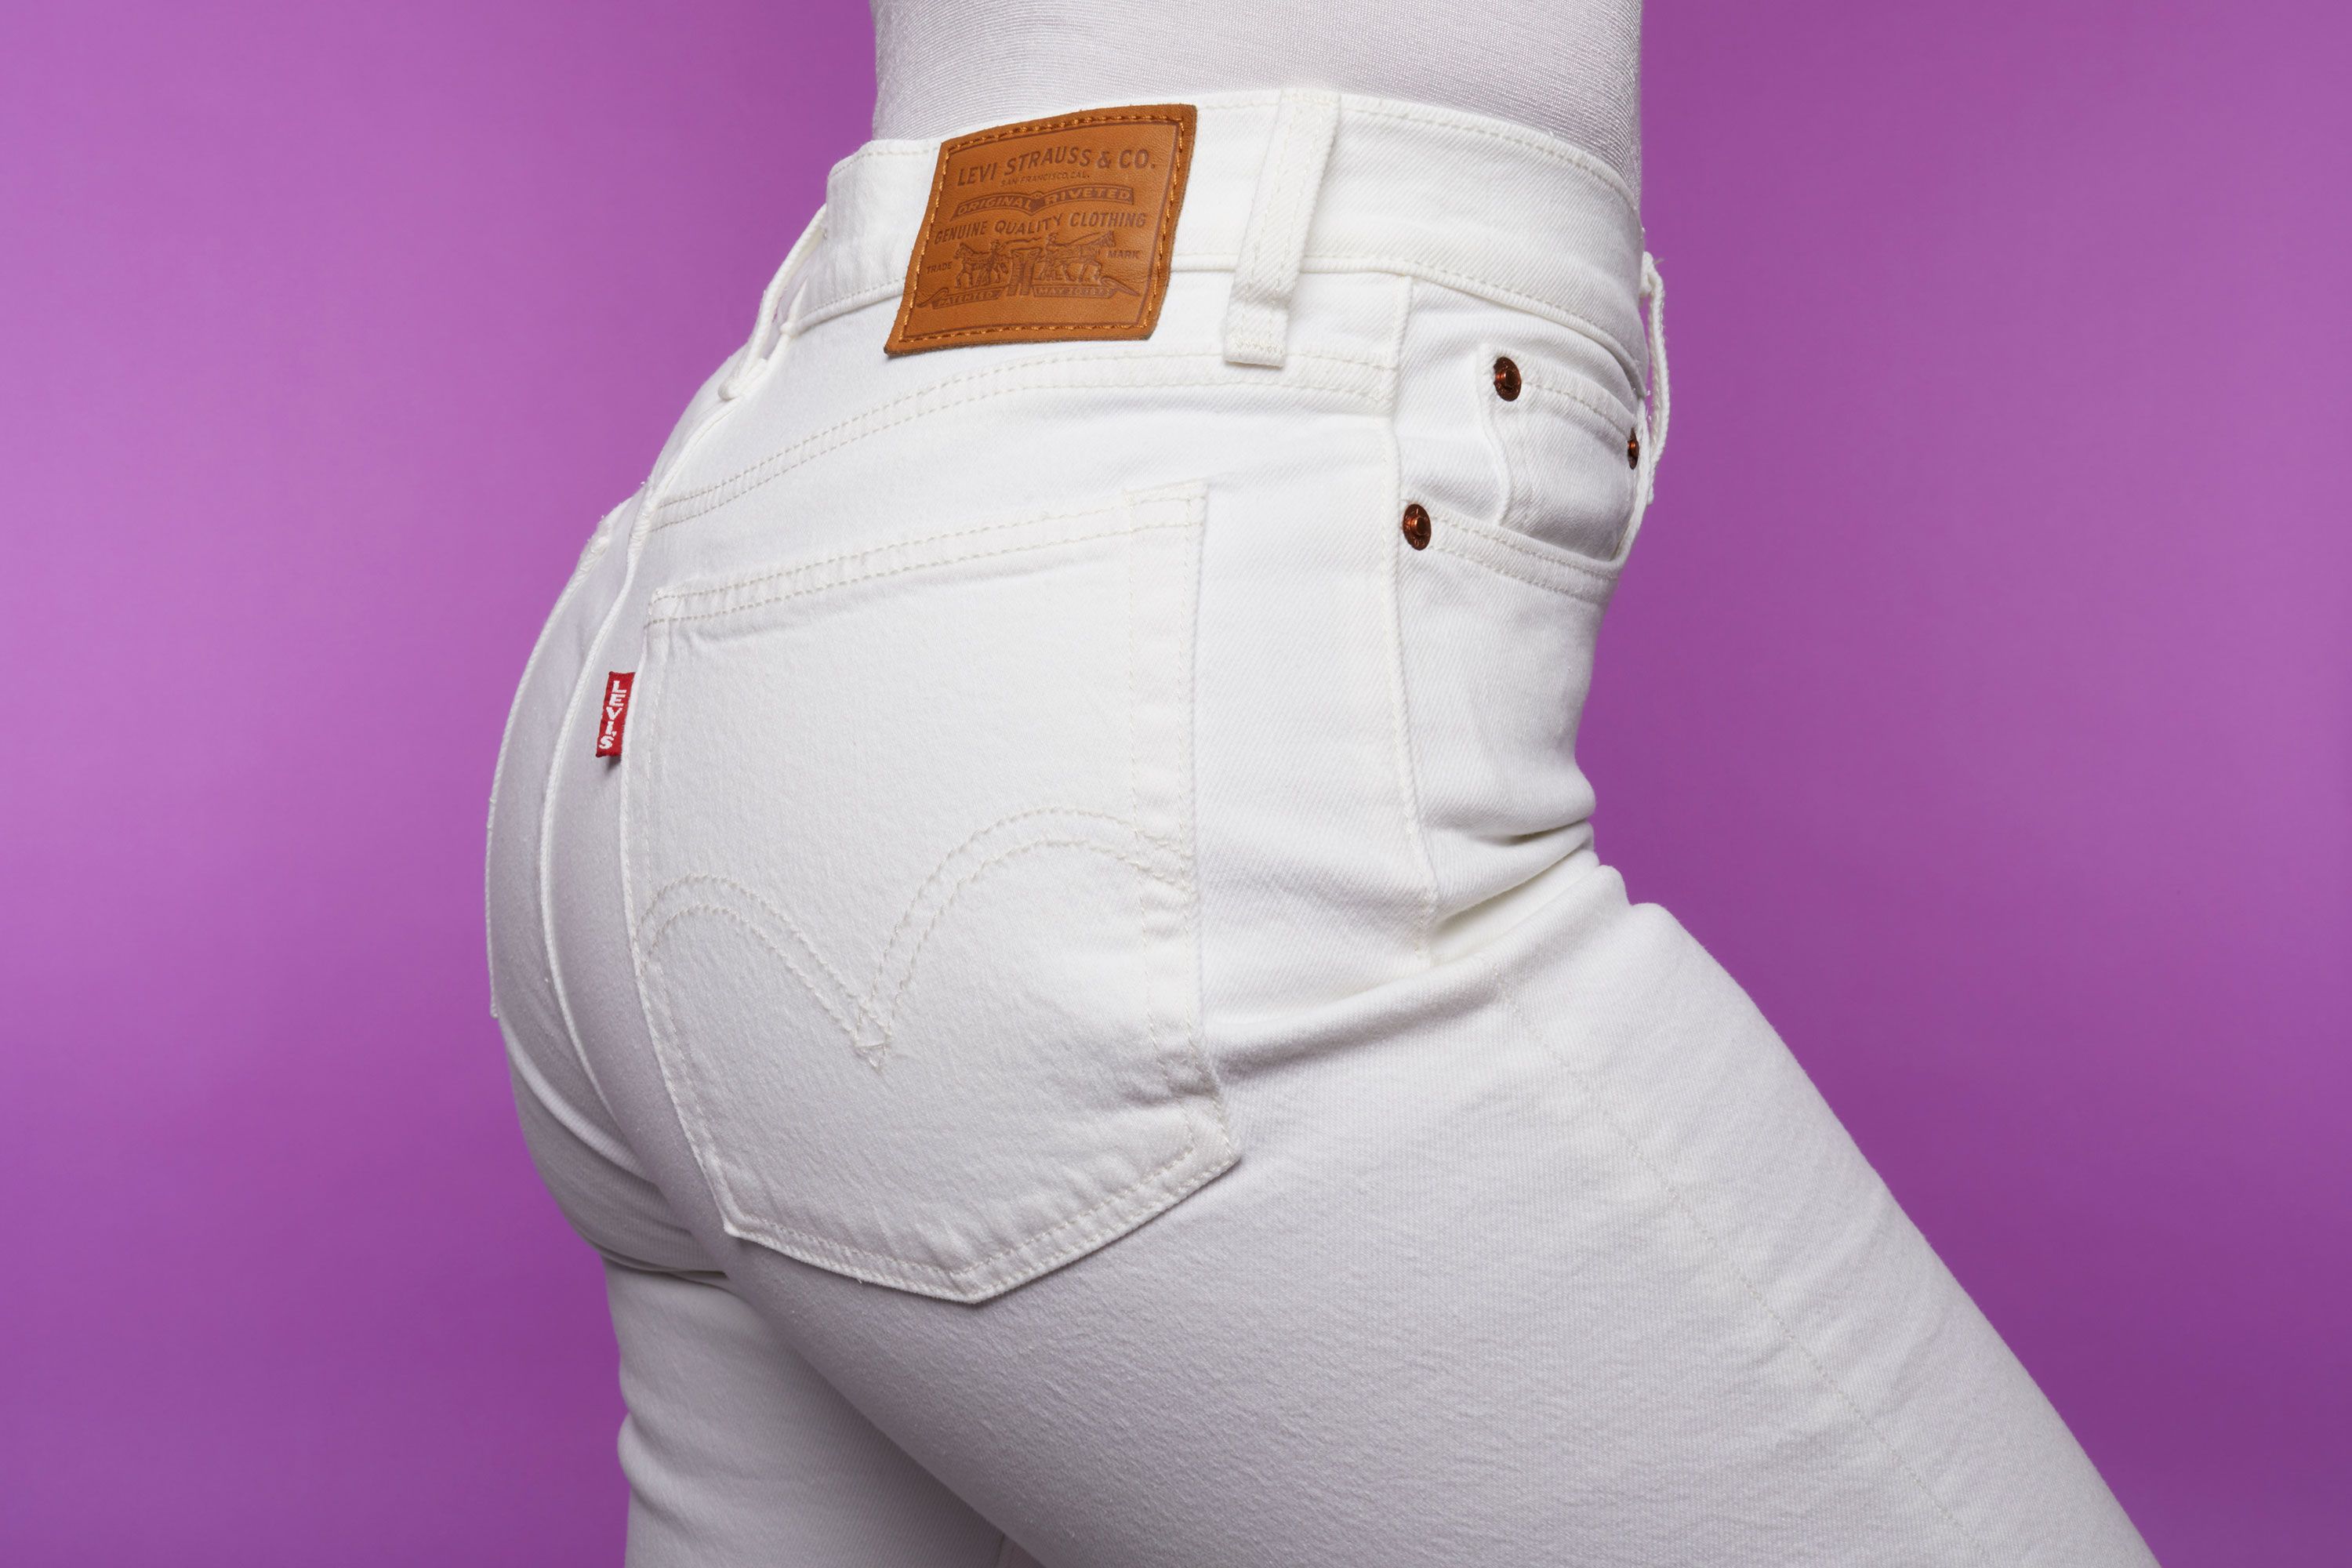 Best High-Waisted Jeans for Women 2022 | The Strategist